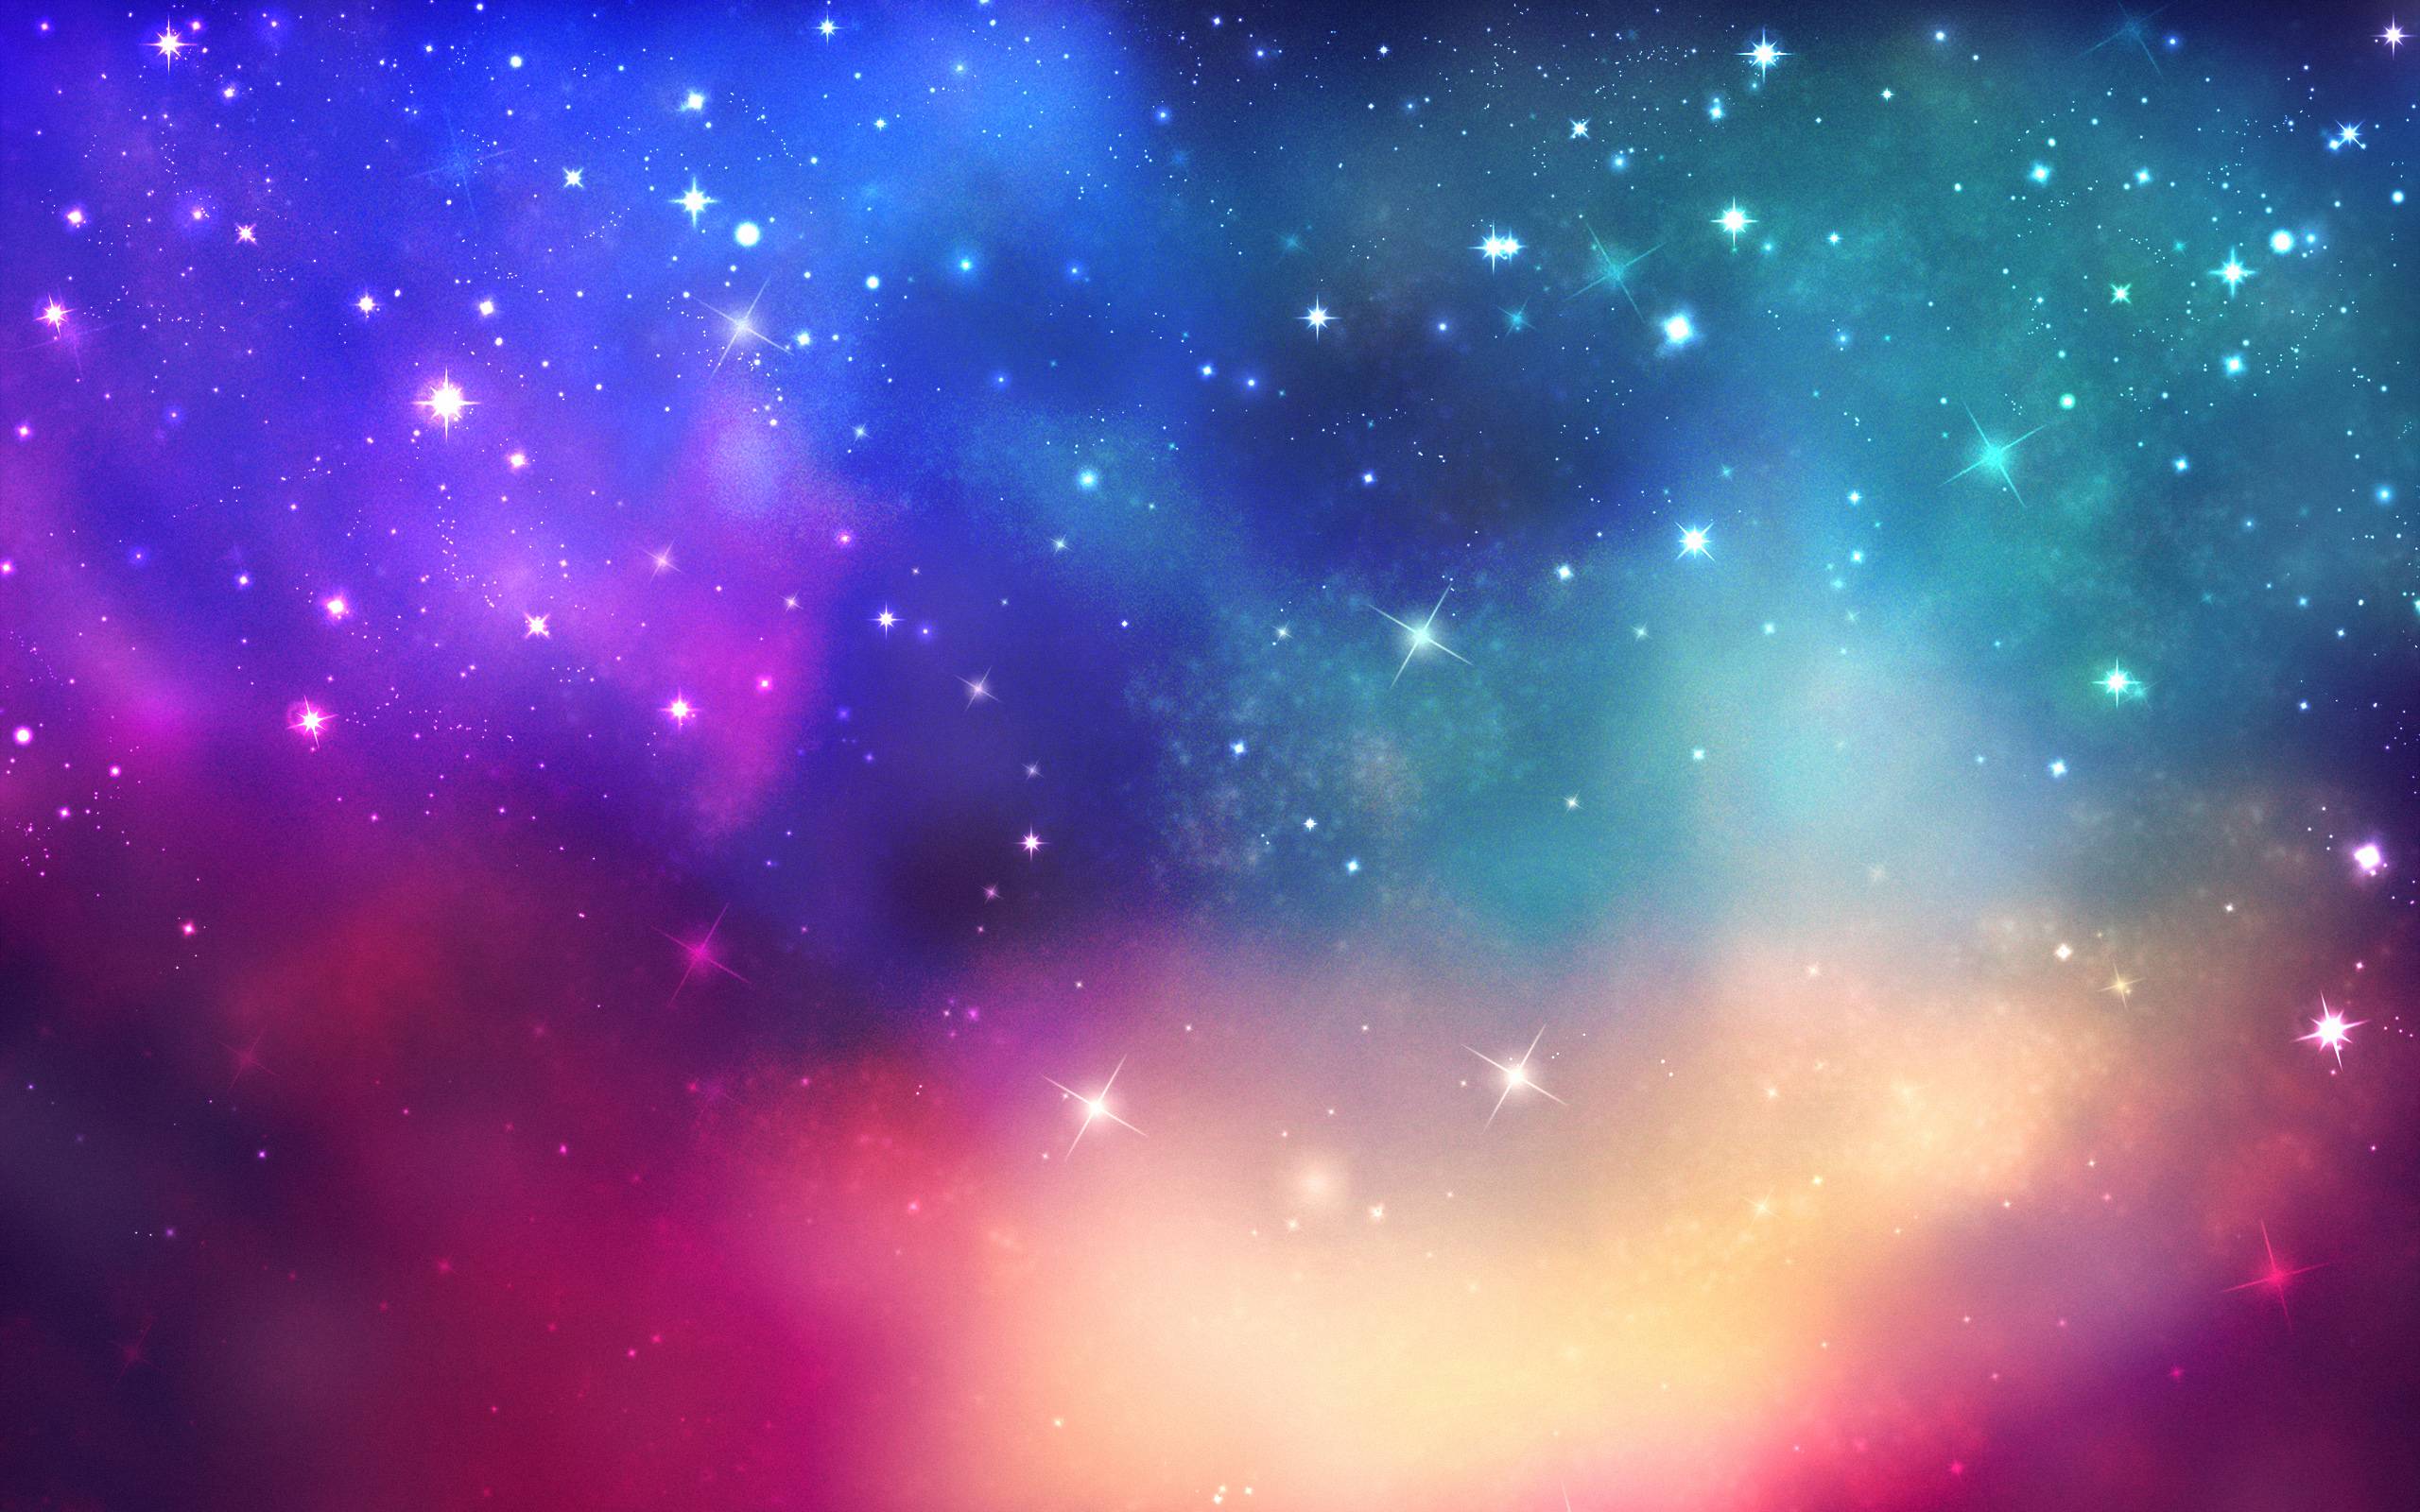 Outer Space Stars Wallpaper HD Background 1 HD Wallpaper. lzamgs